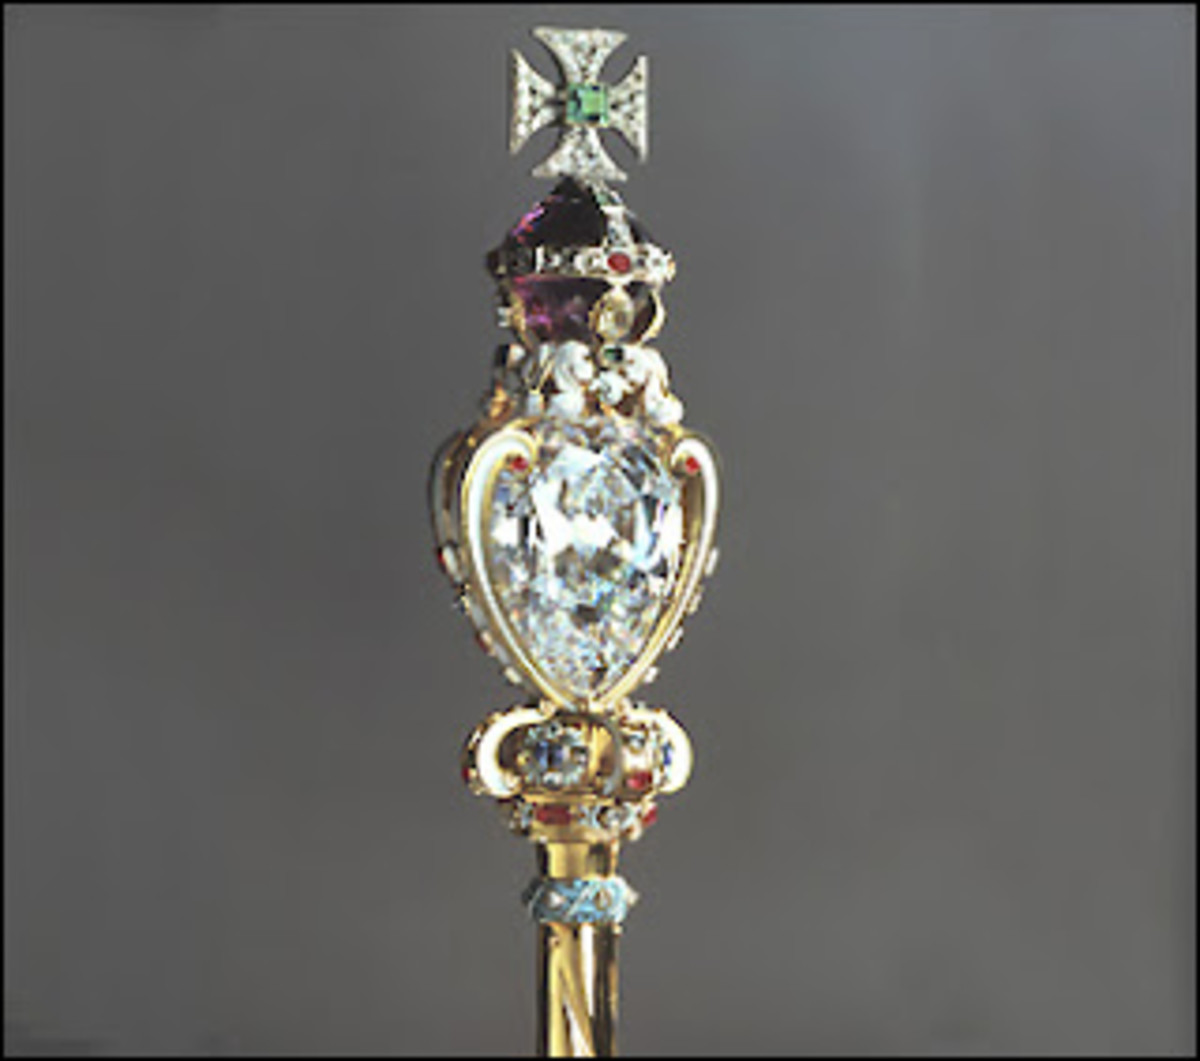 The Royal Scepter